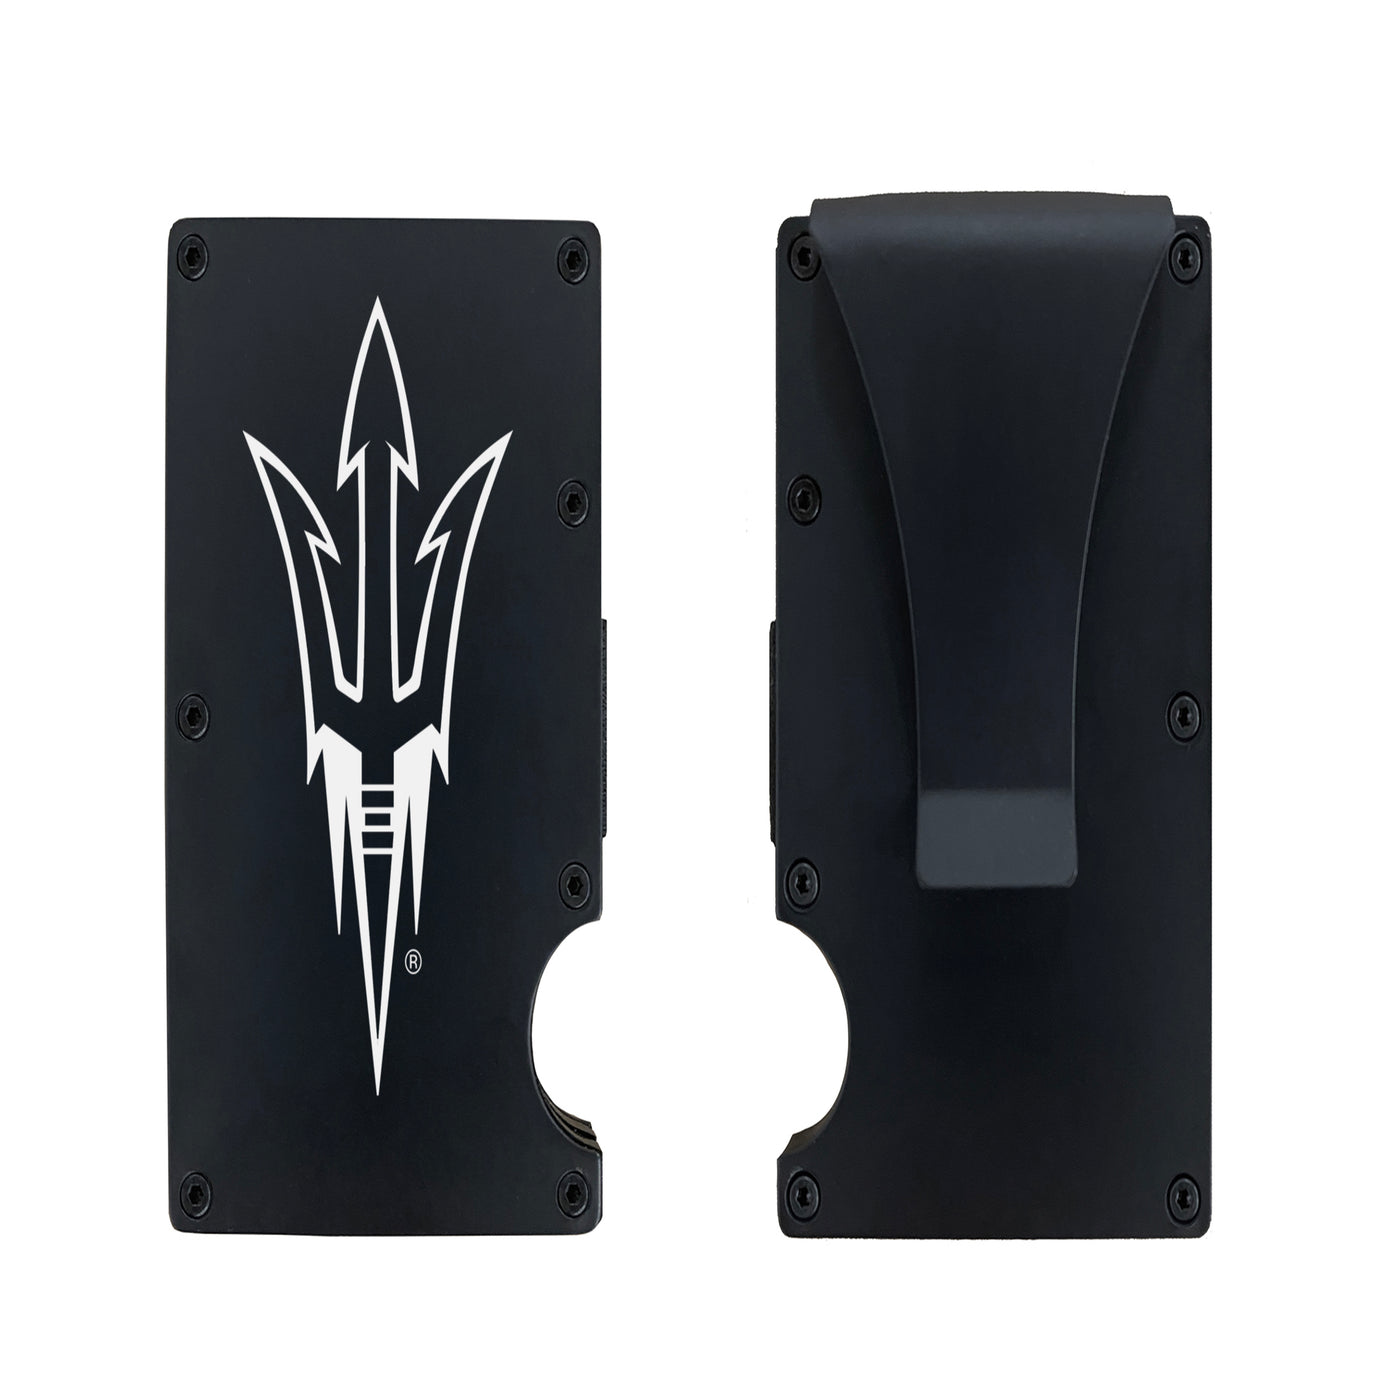 ASU black aluminum wallet with a white outlined pitchfork